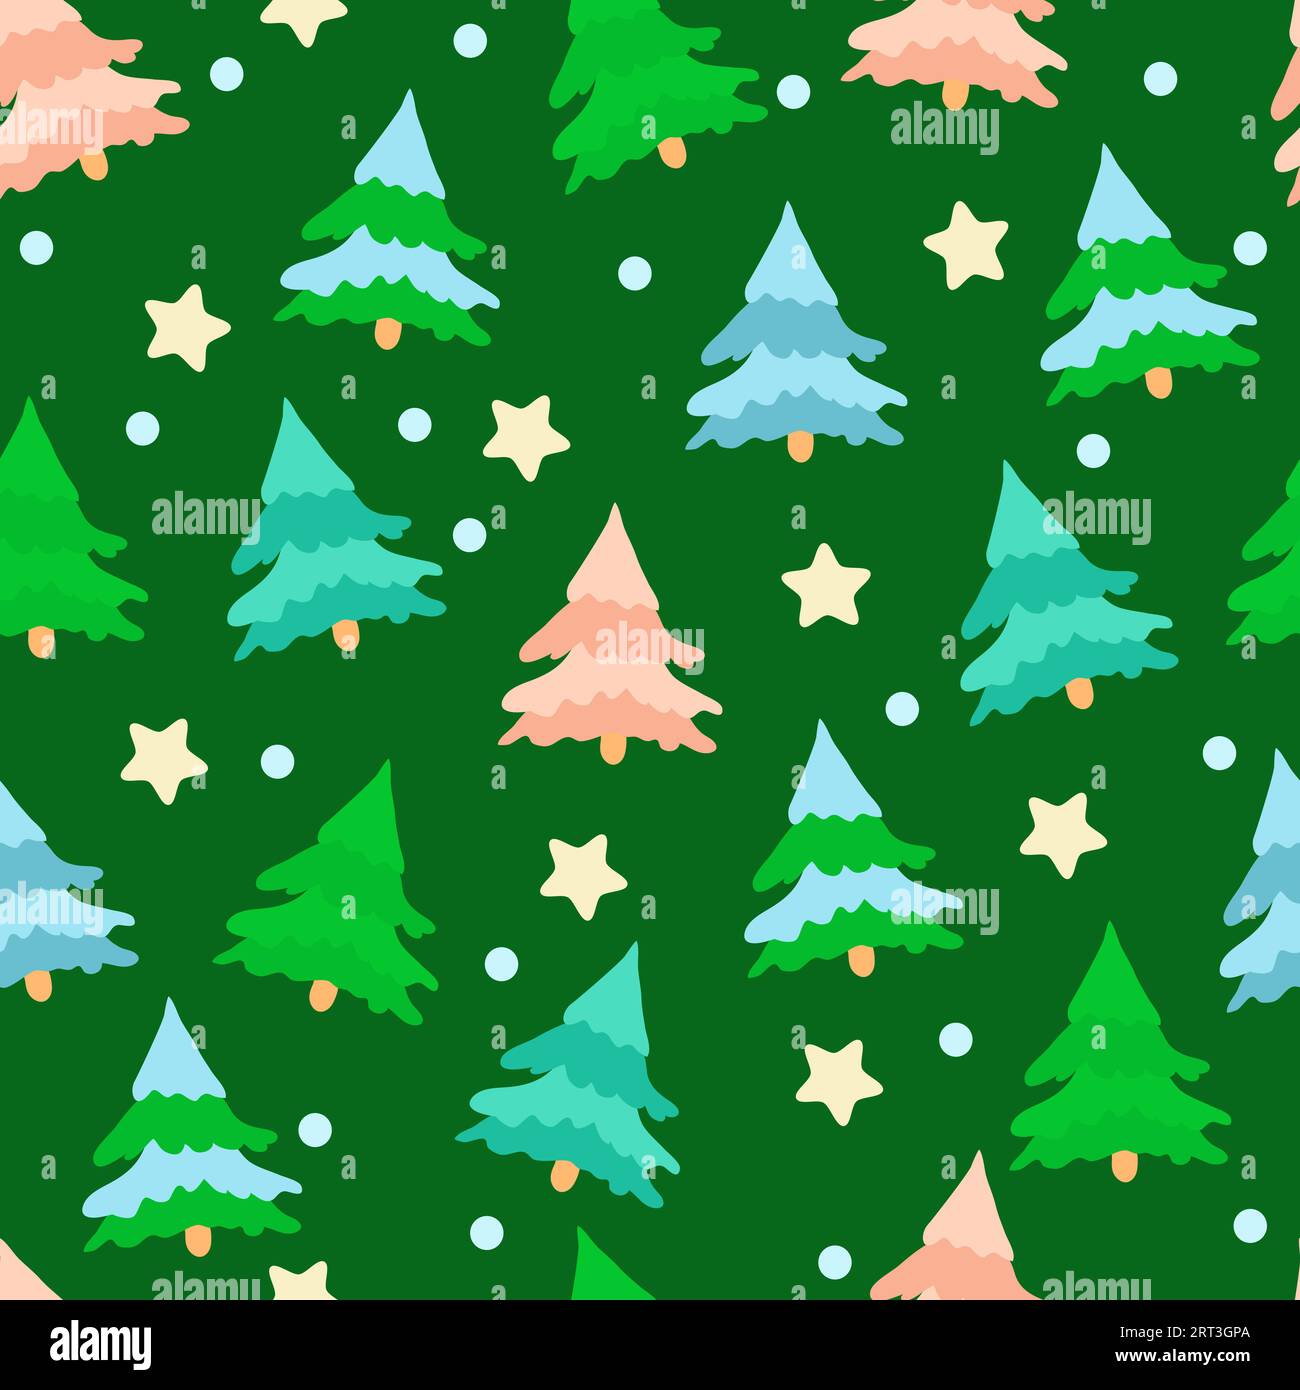 Green, blue, coral spruces and stars on a dark green background. Seamless pattern for backgrounds, packaging, textiles and web design. Stock Vector